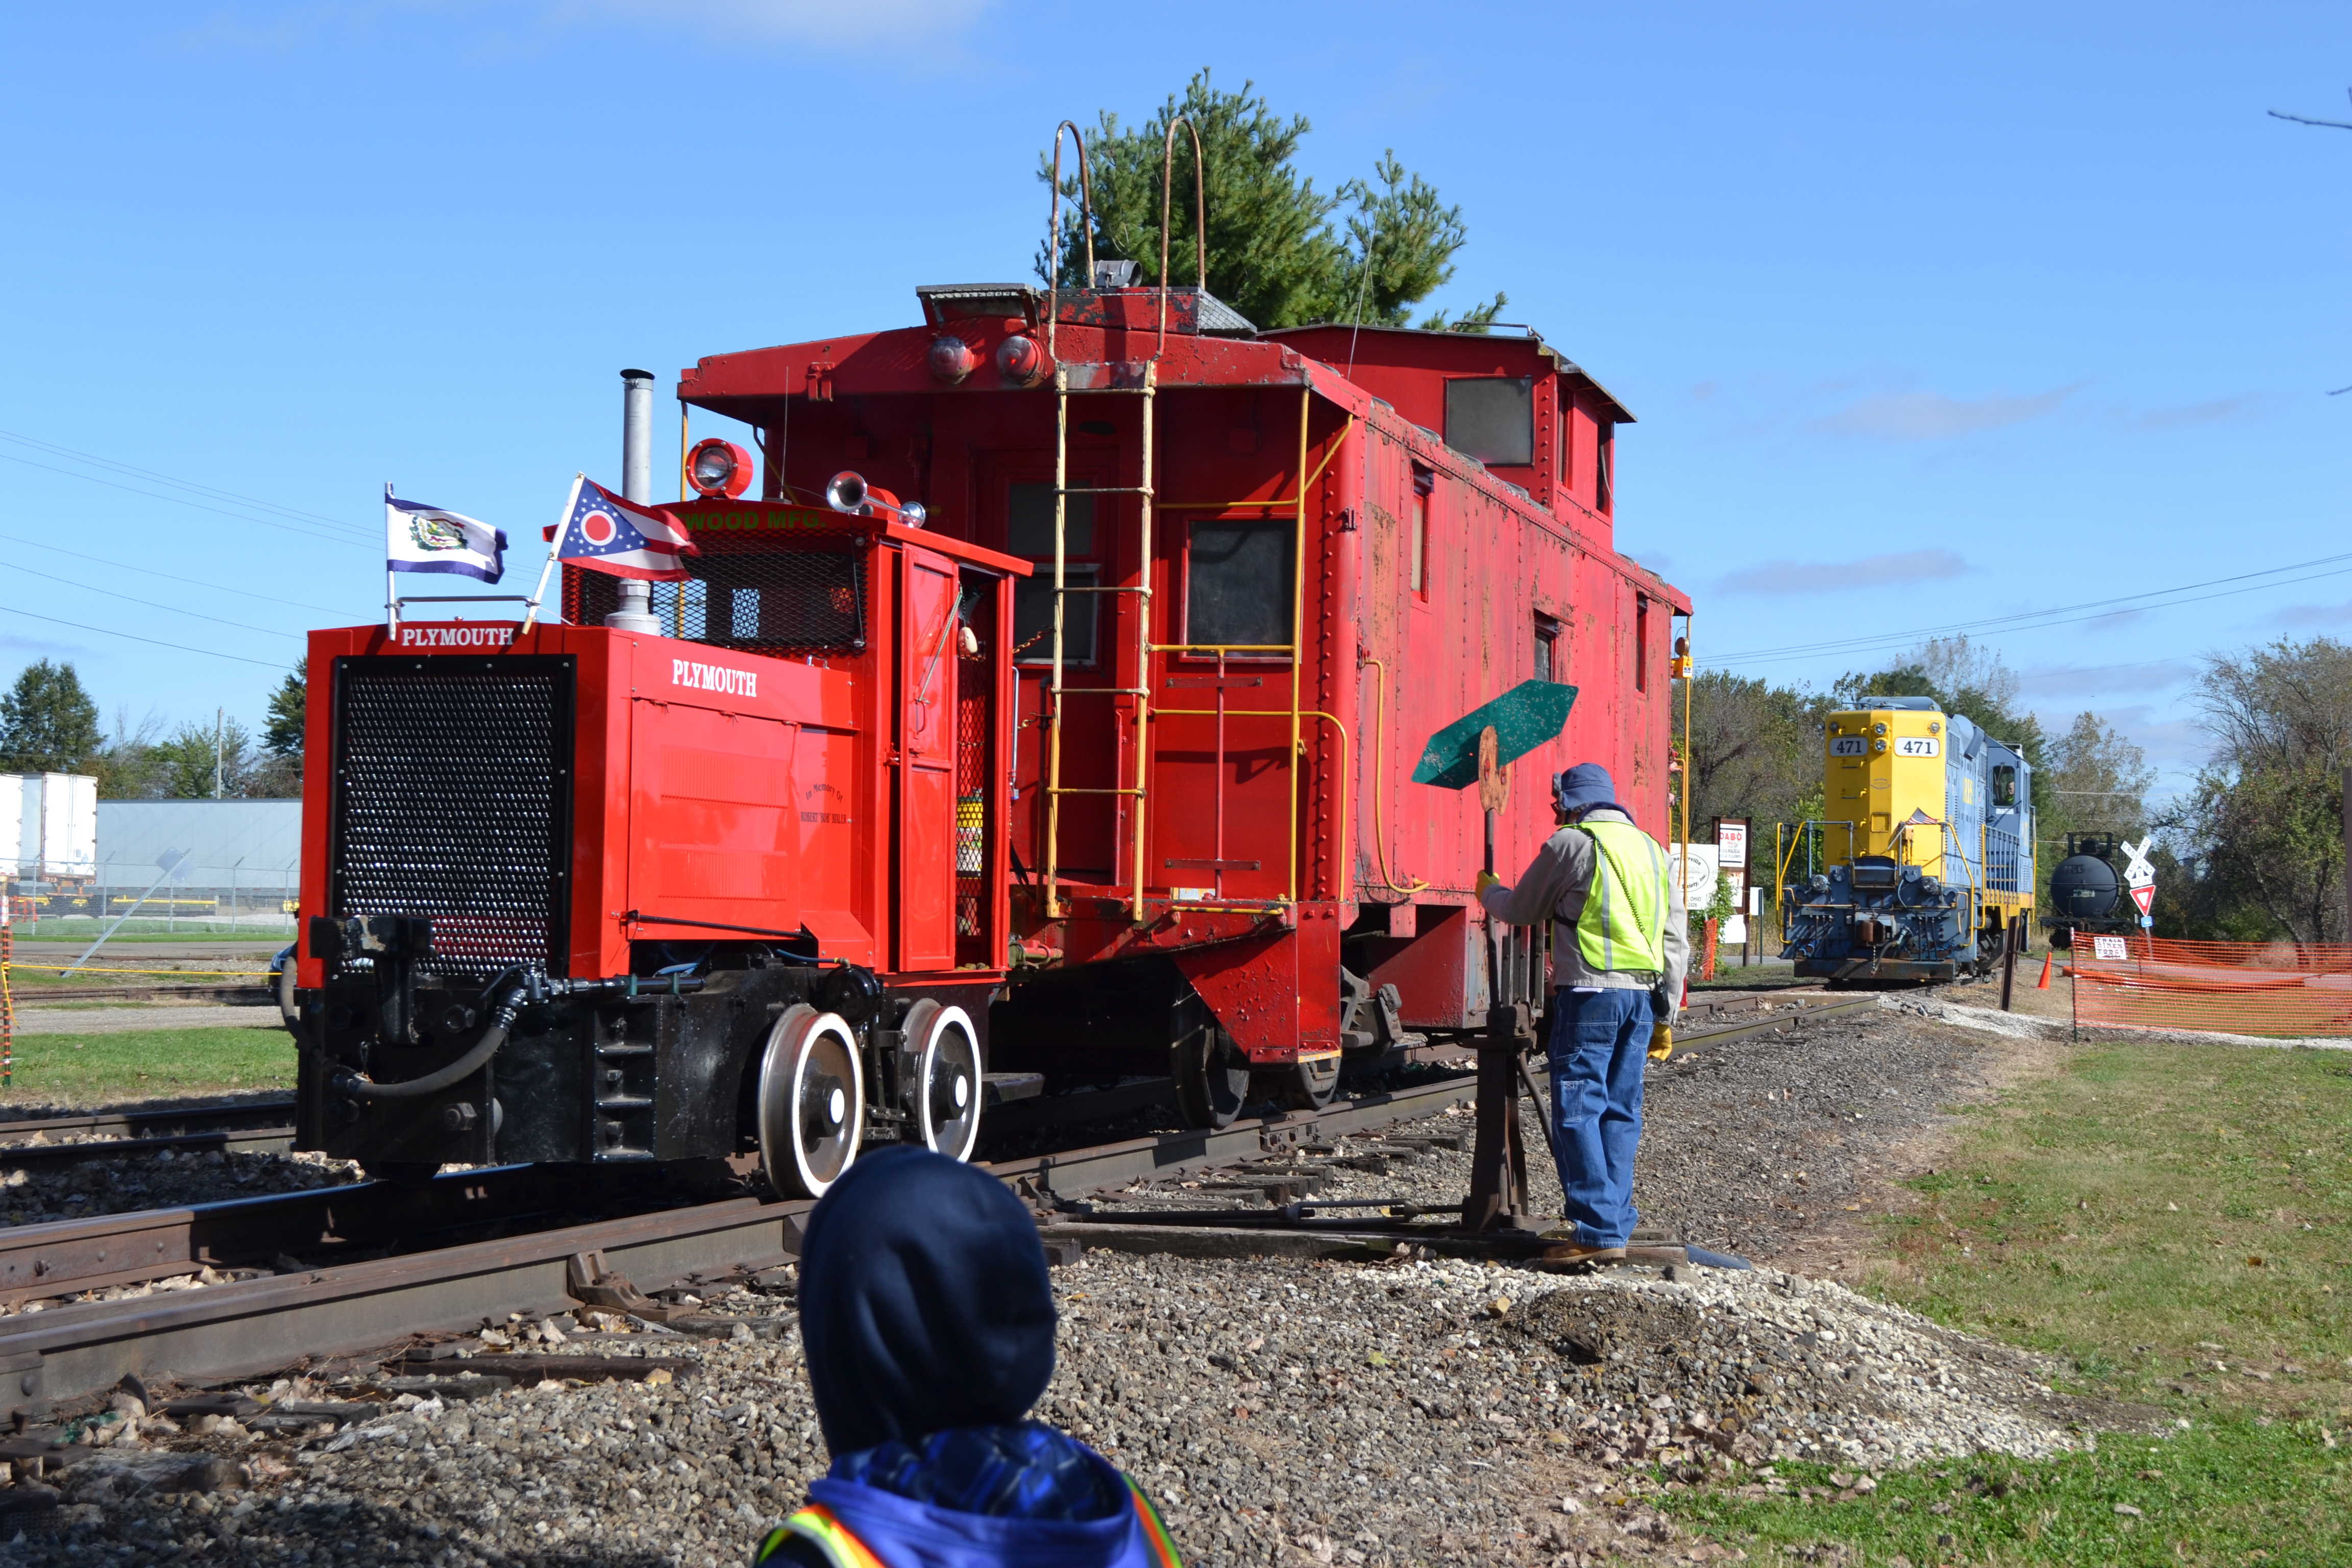 LRE pulling a caboose